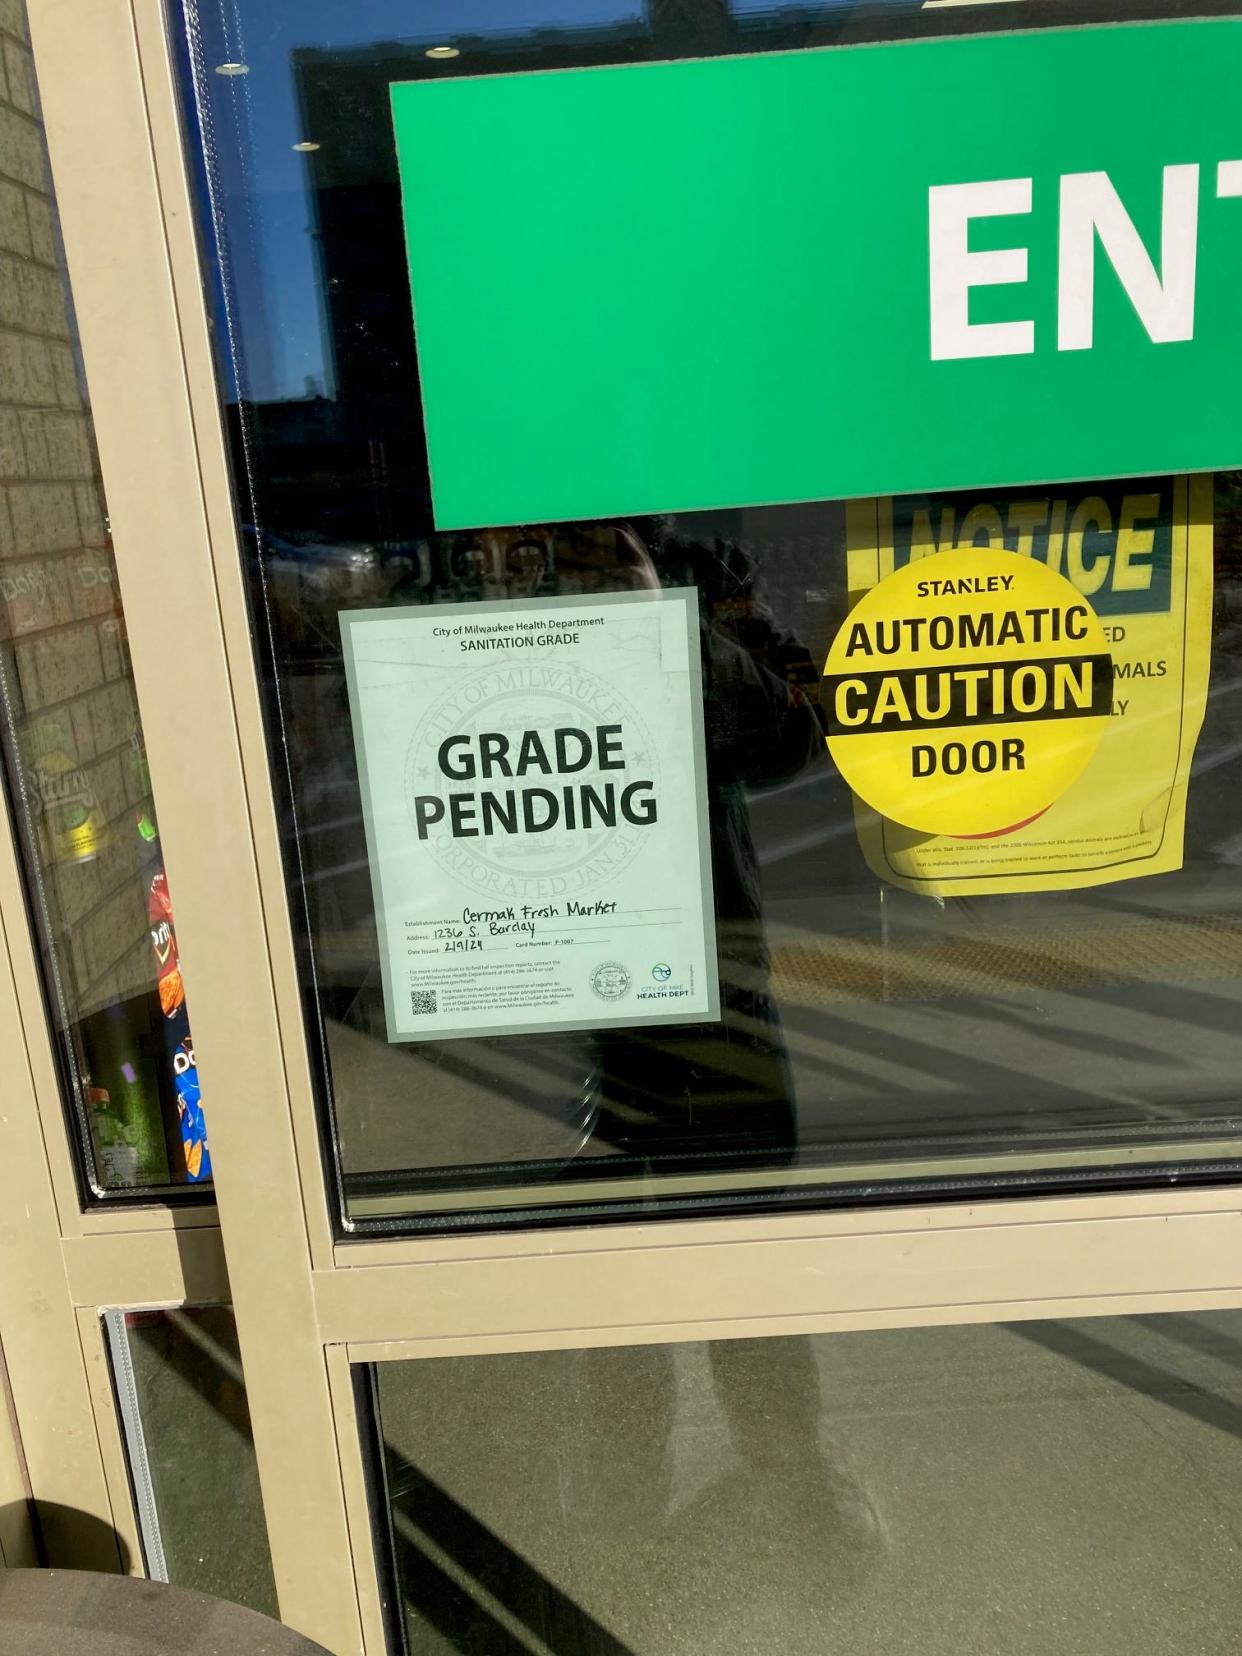 The Cermak Fresh Market in Walker's Point has reopened after the Milwaukee Health Department said it found the store had addressed the priority items in its reports. A "Grade Pending" sign posted by the Milwaukee Health Department was seen on one of the store's main doors on Saturday afternoon.